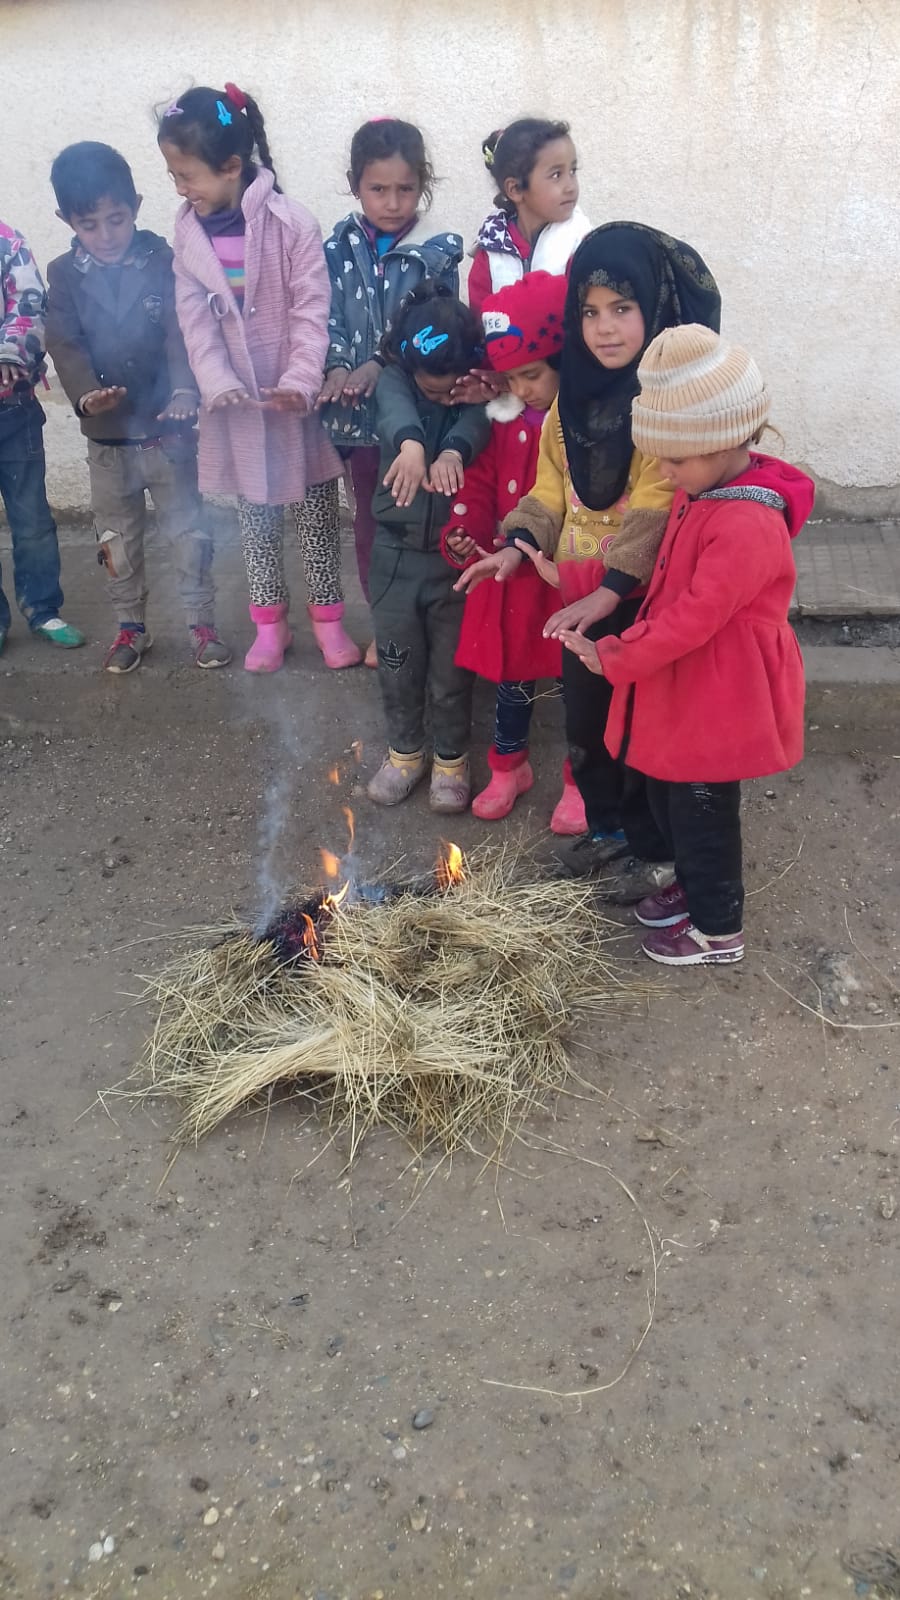 Urgent appeal for helping Syrian families this winter